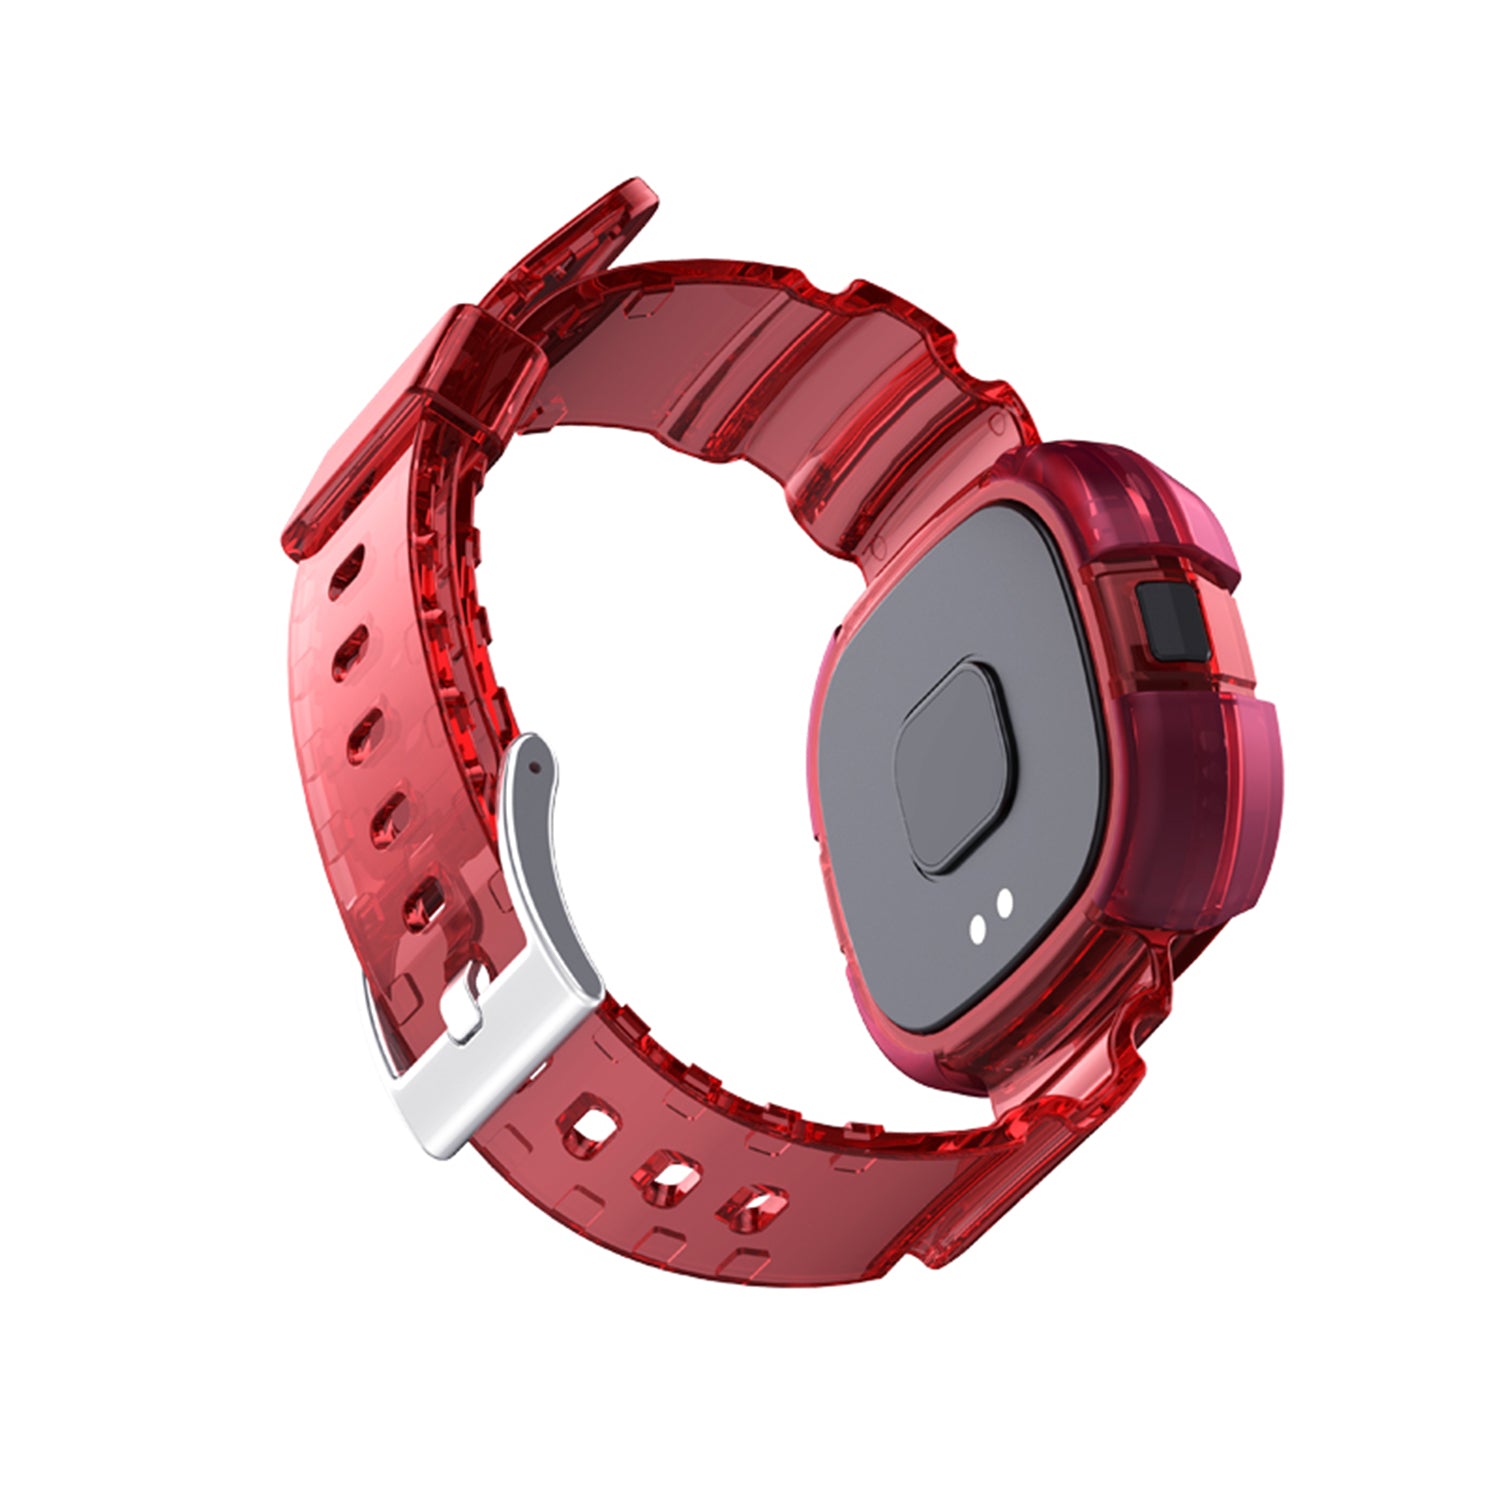 HAVIT M90 Smart Watch with Replaceable Colorful Transparent Starp, IP68 Waterproof Rating